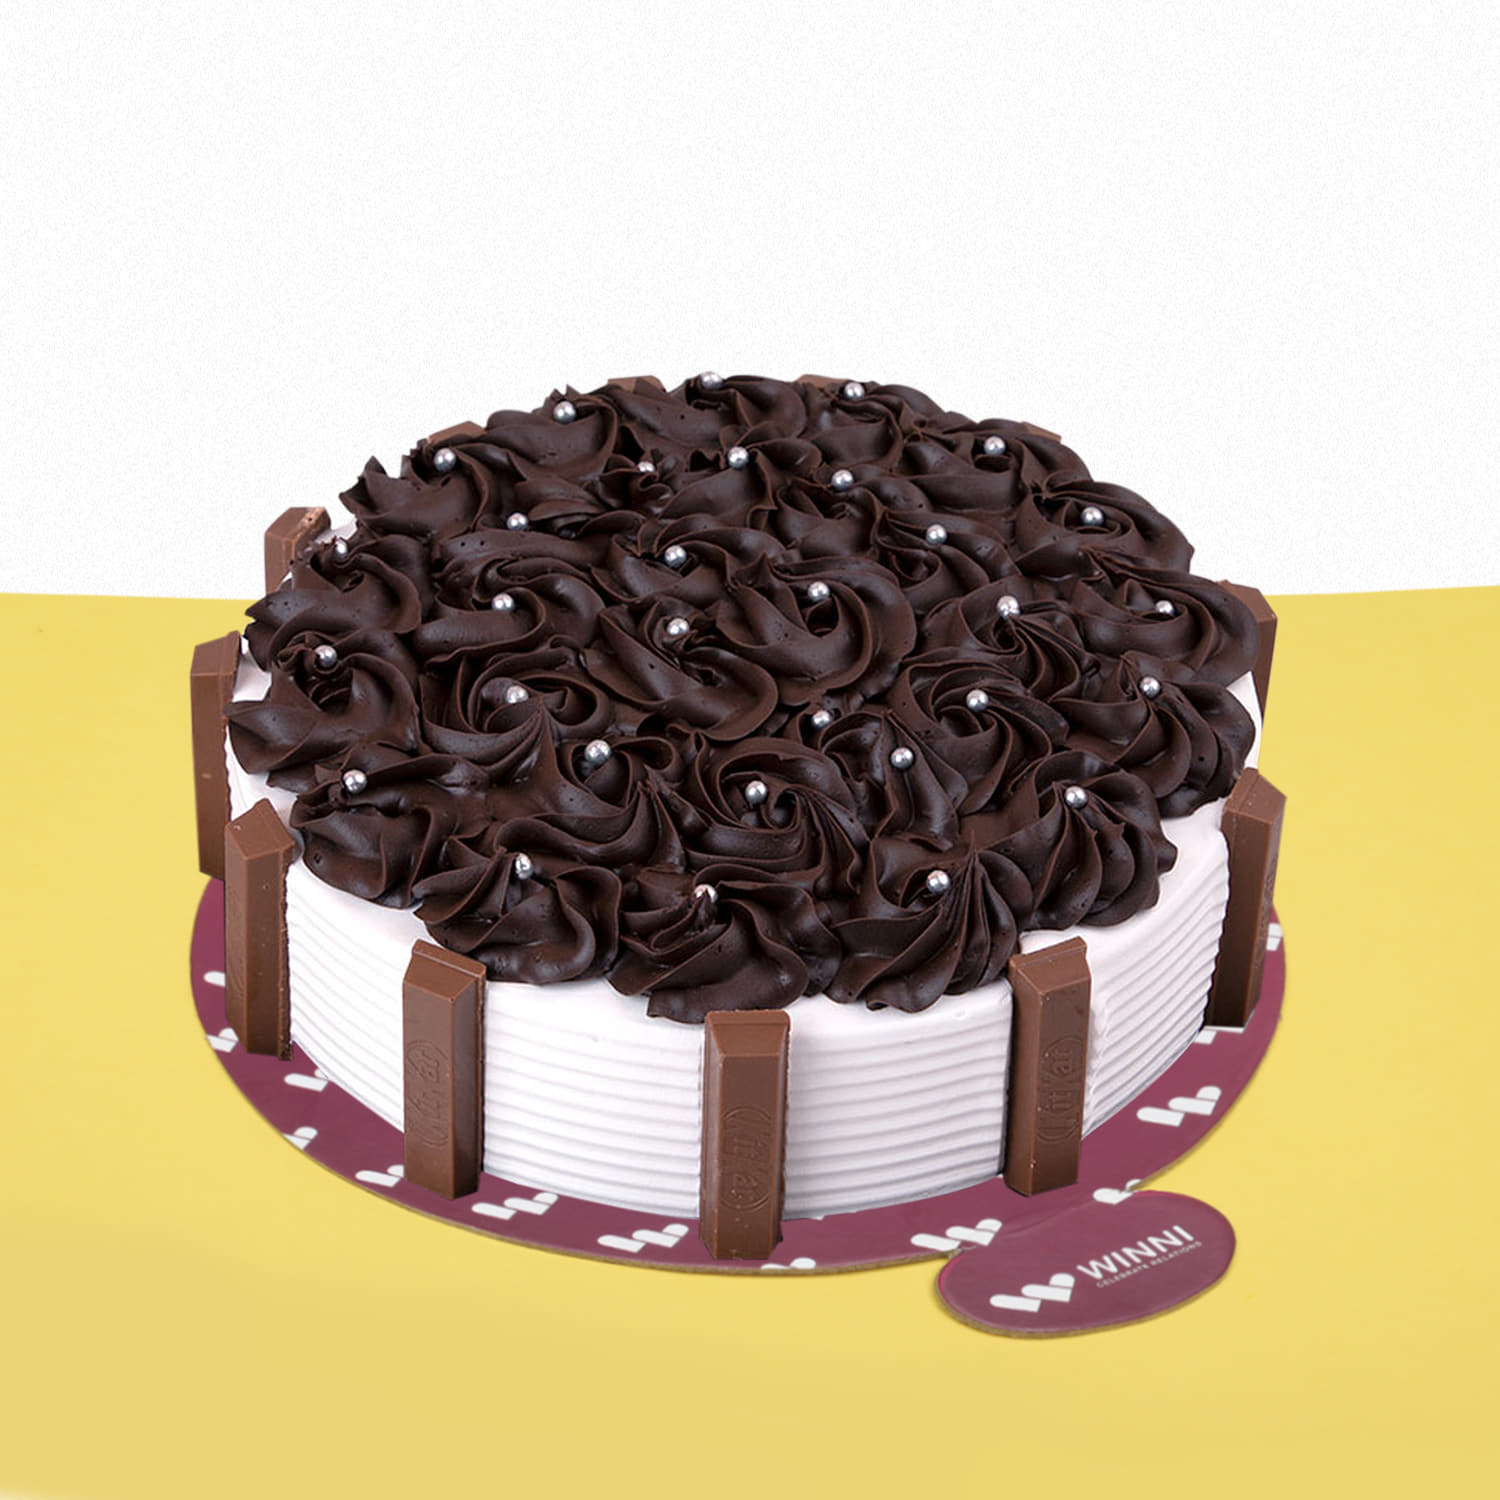 554,394 Chocolate Cake Decoration Images, Stock Photos, 3D objects, &  Vectors | Shutterstock